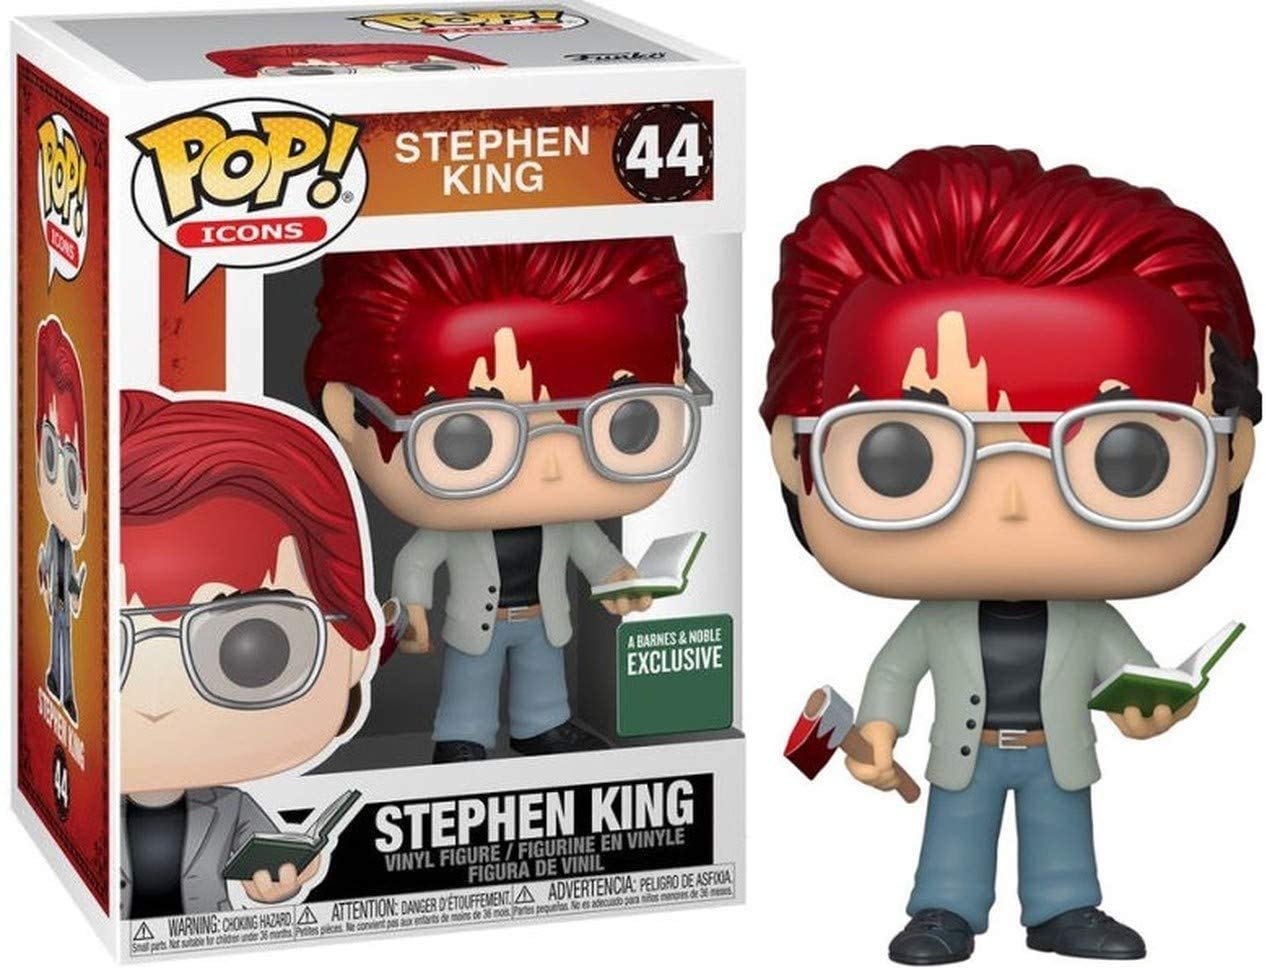 Funko POP! Icons Stephen King #44 [with Axe and Book] Exclusive